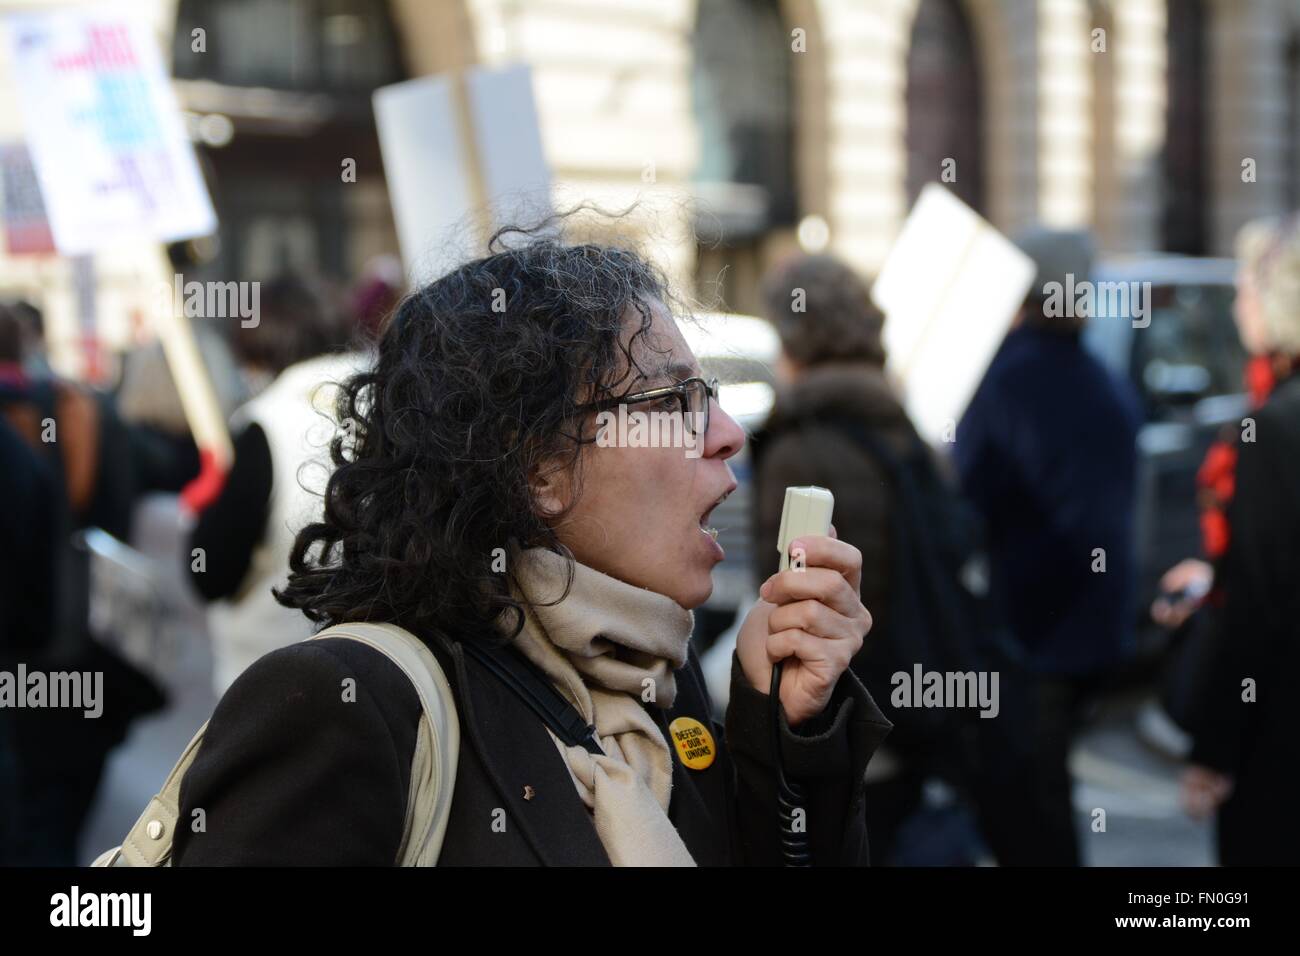 London, UK. 13th March 2016. Protester shouts into megaphone at anti-Housing bill protest. Credit:  Marc Ward/Alamy Live News Stock Photo